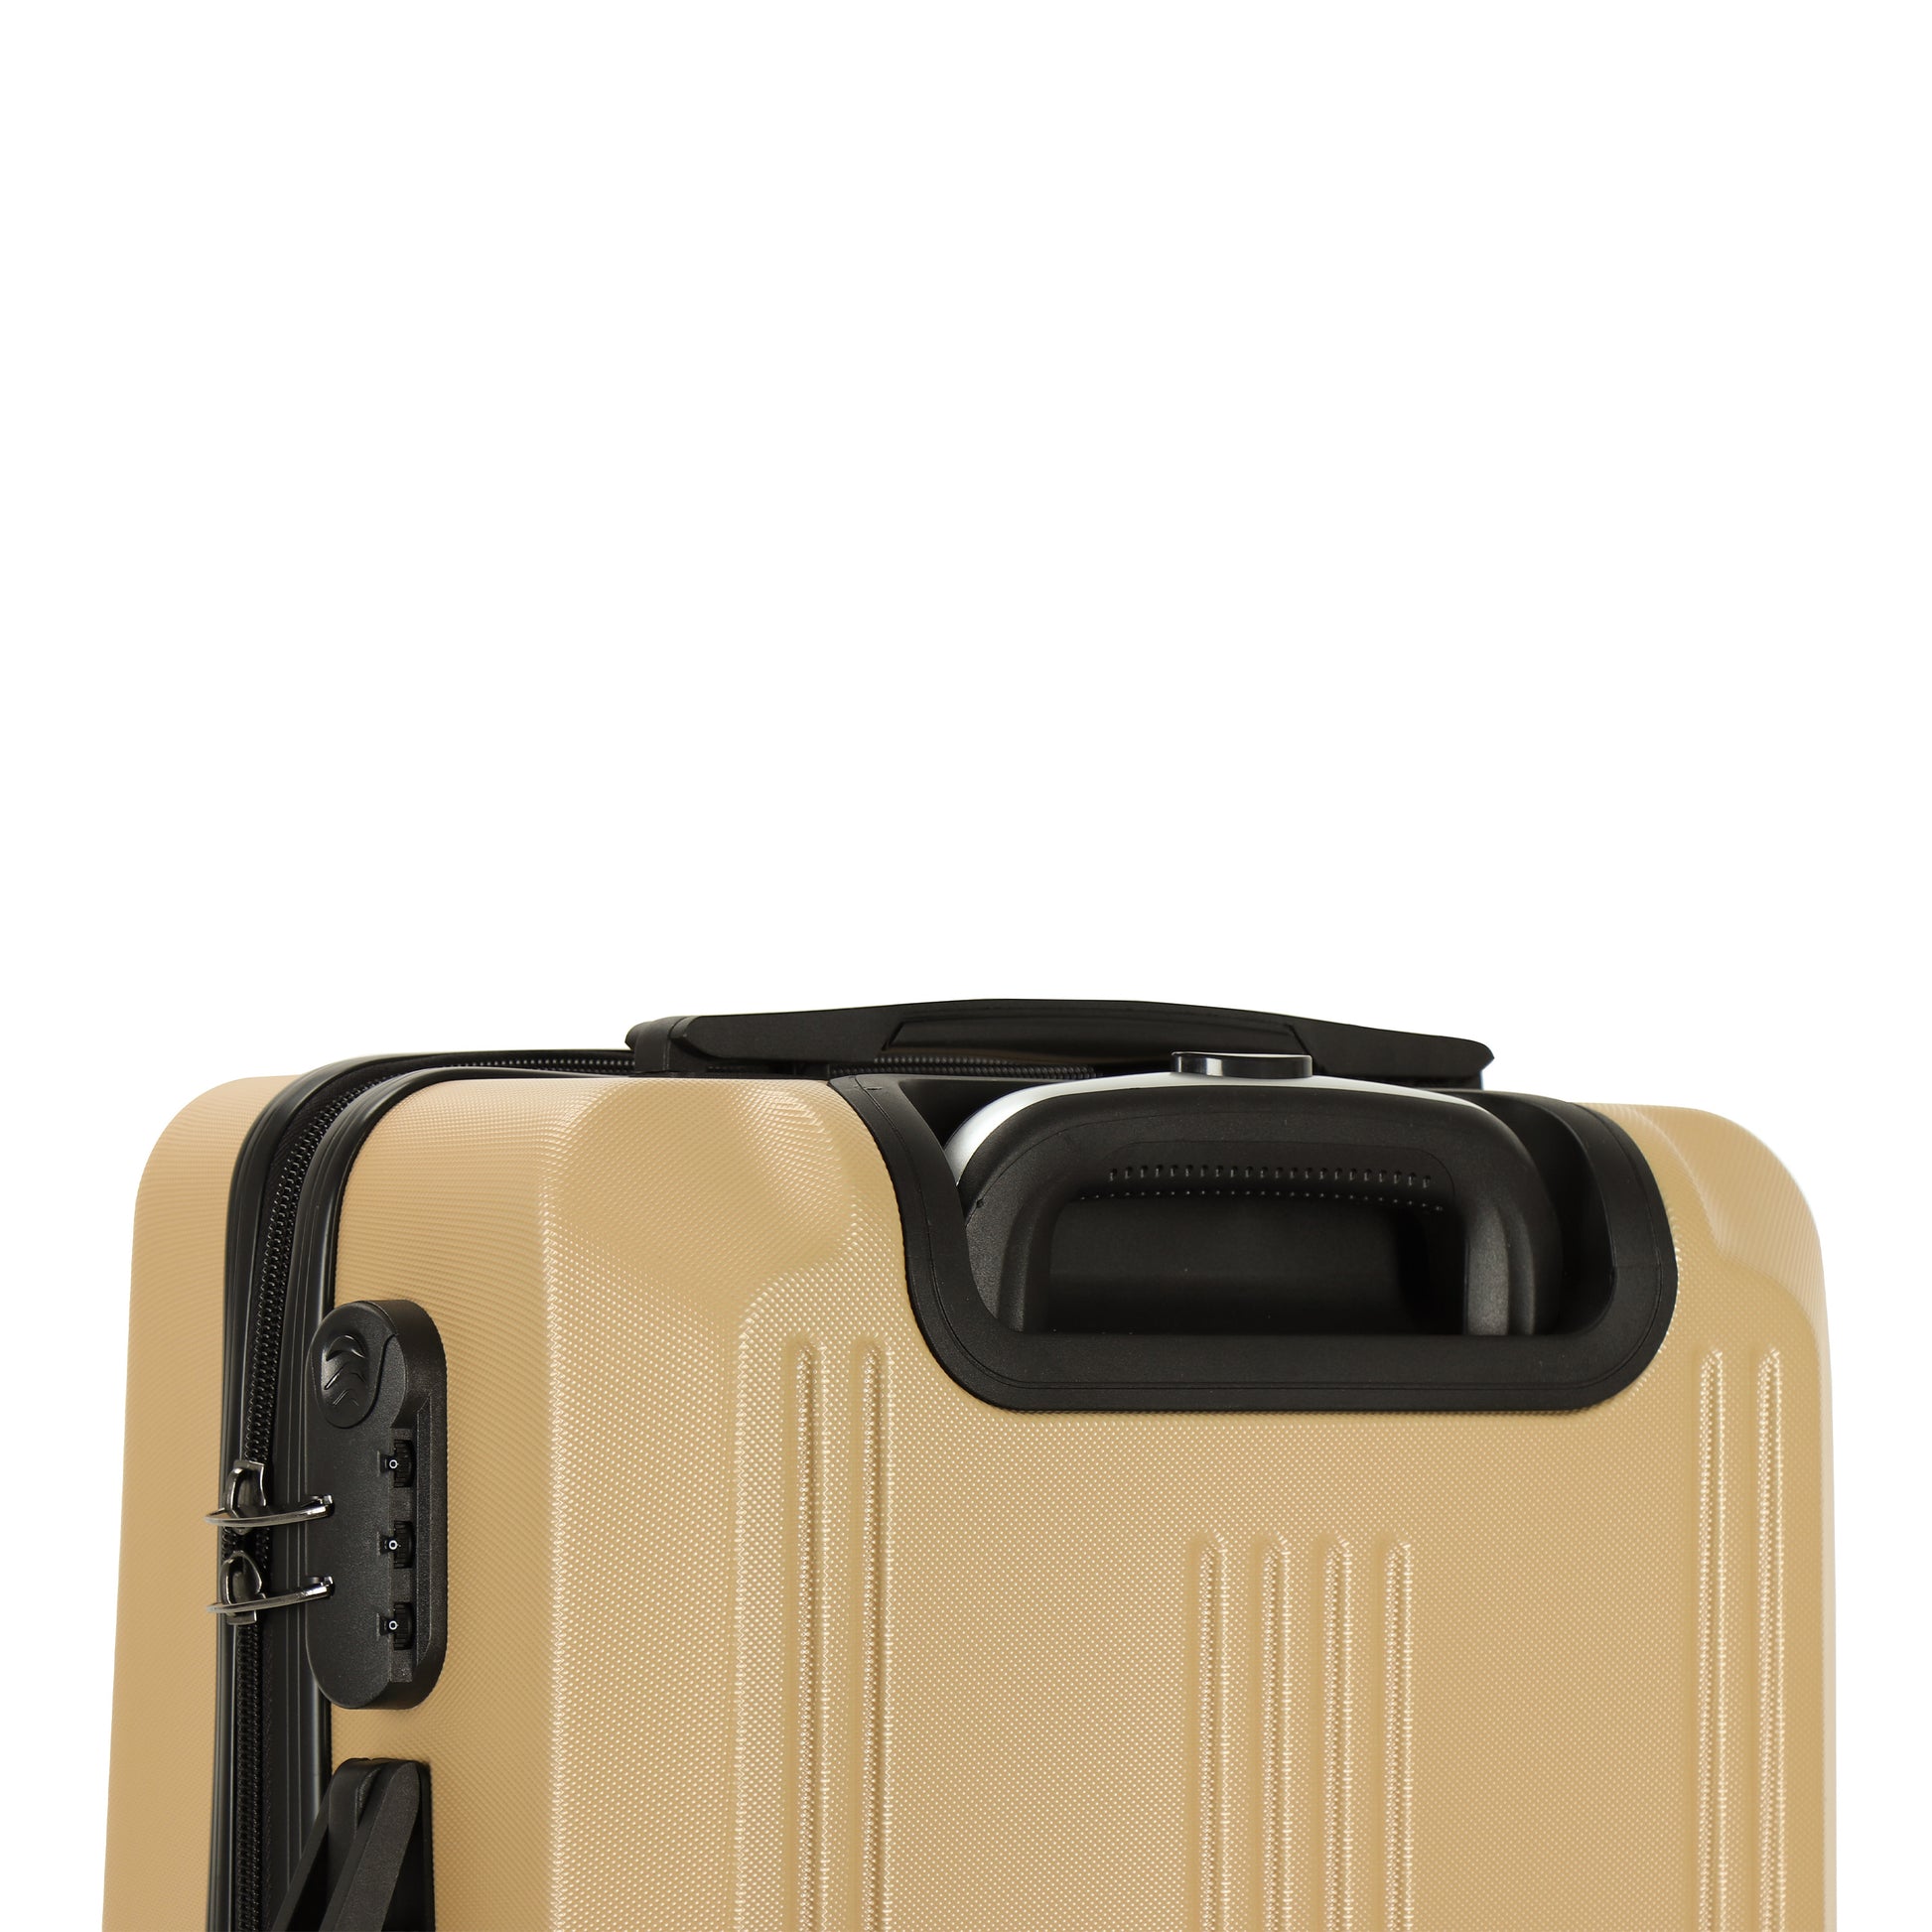 Easy Luggage Tabby Voyager 3 Piece Hard Shell Suitcase 360° Spinner Wheels Champagne Gold